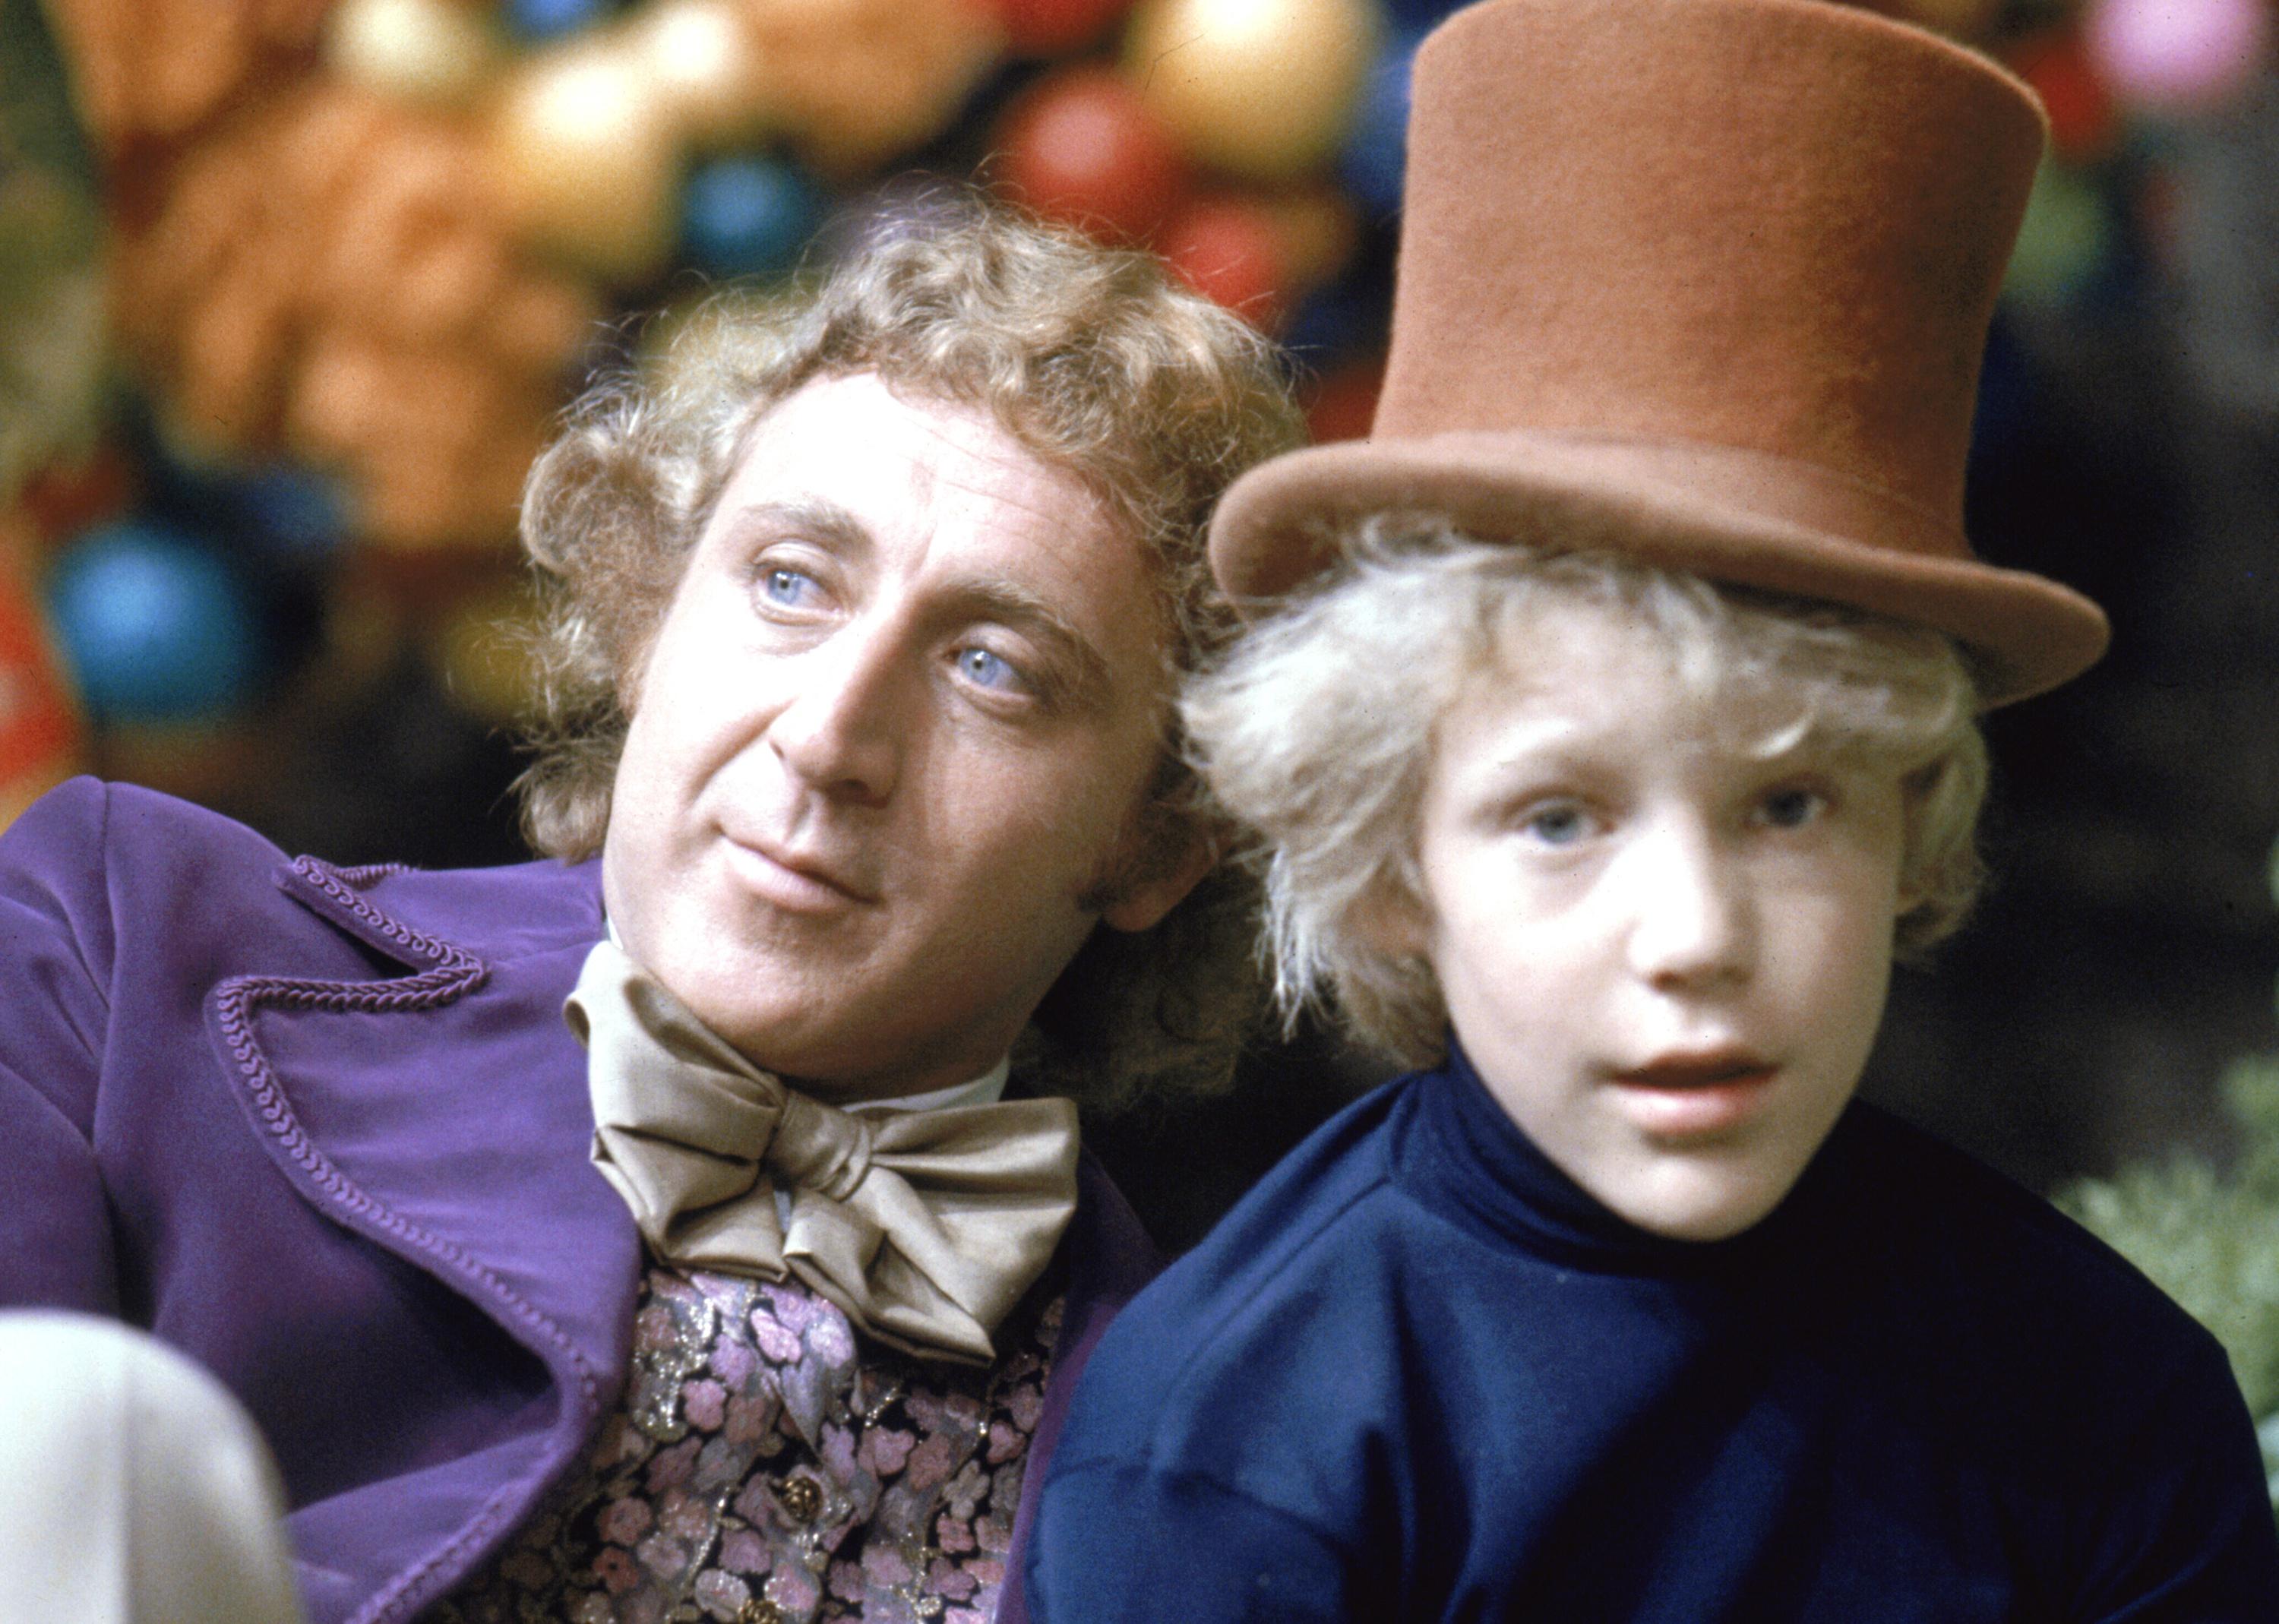 Gene Wilder as Willy Wonka and Peter Ostrum as Charlie Bucket on the set of 'Willy Wonka & the Chocolate Factory'.